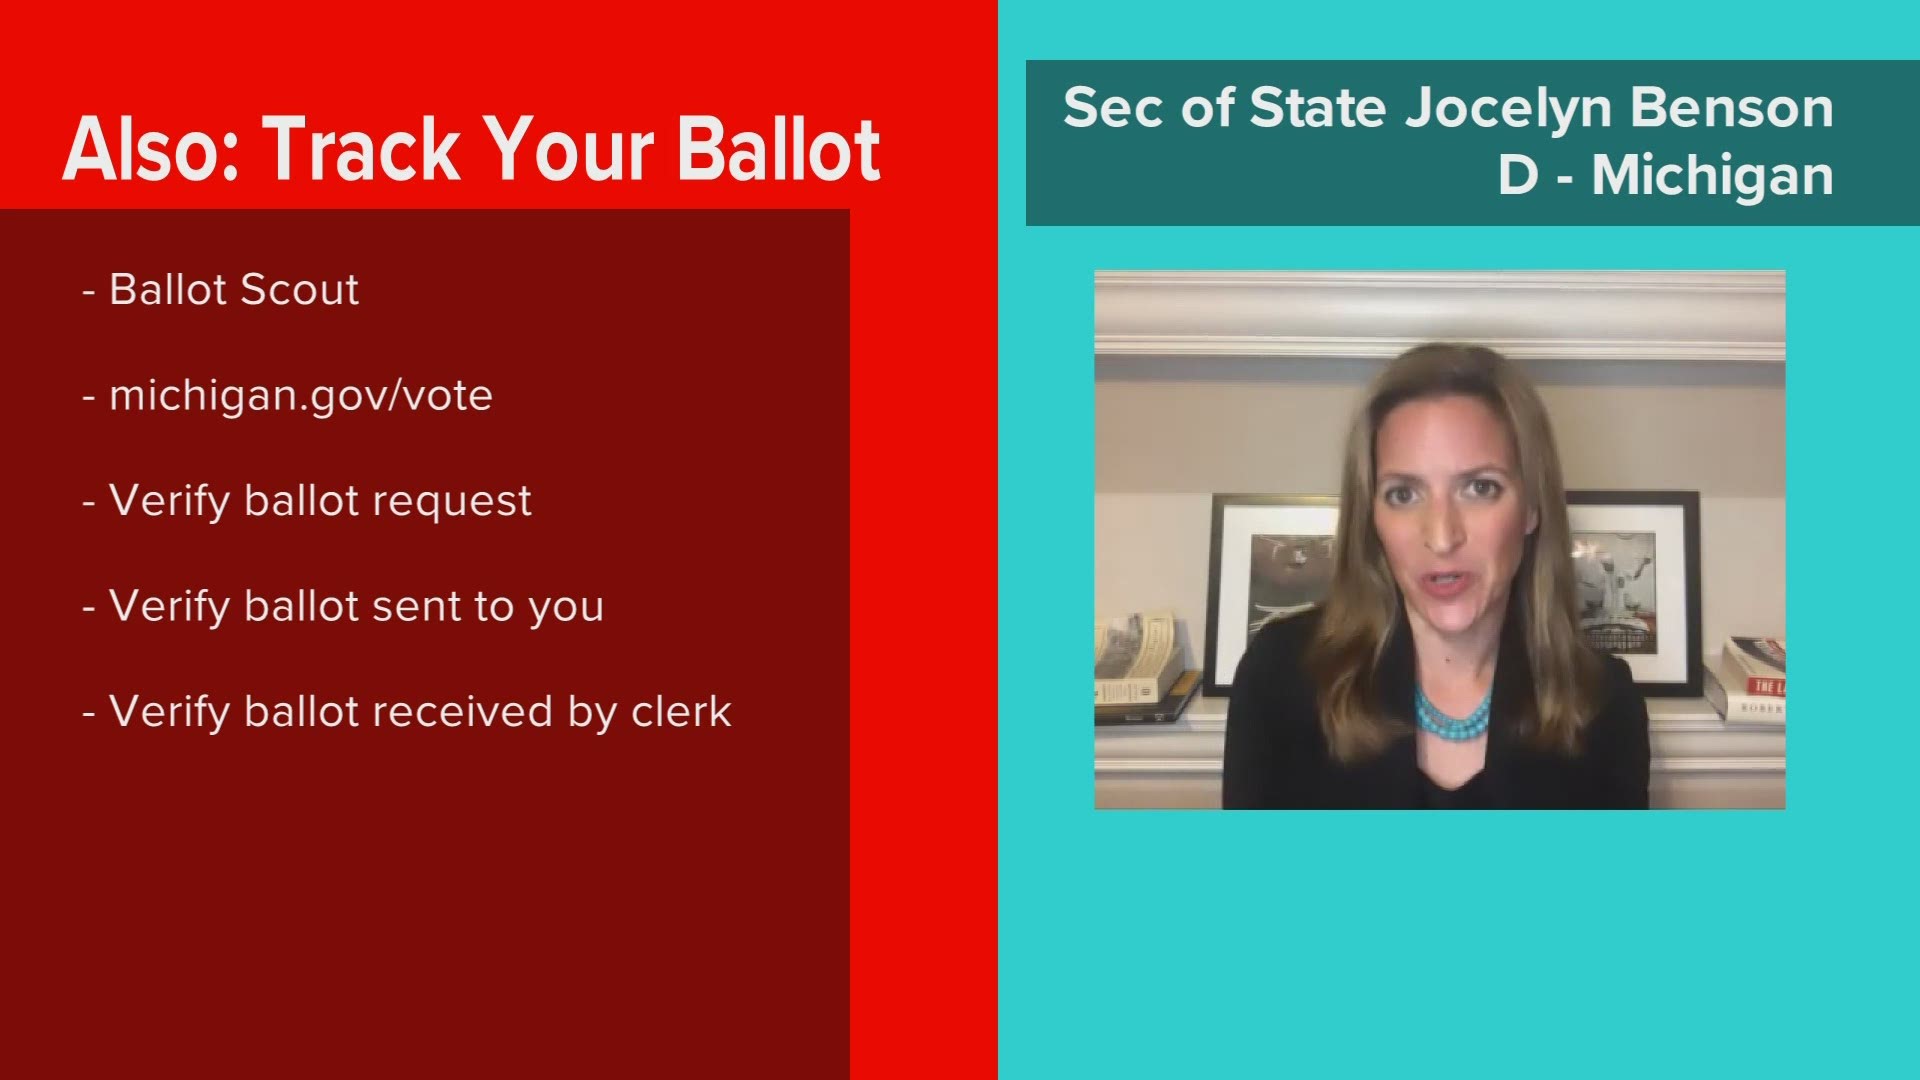 With a record number of voters submitting ballots by mail, Secretary of State Jocelyn Benson answered some questions about the process.